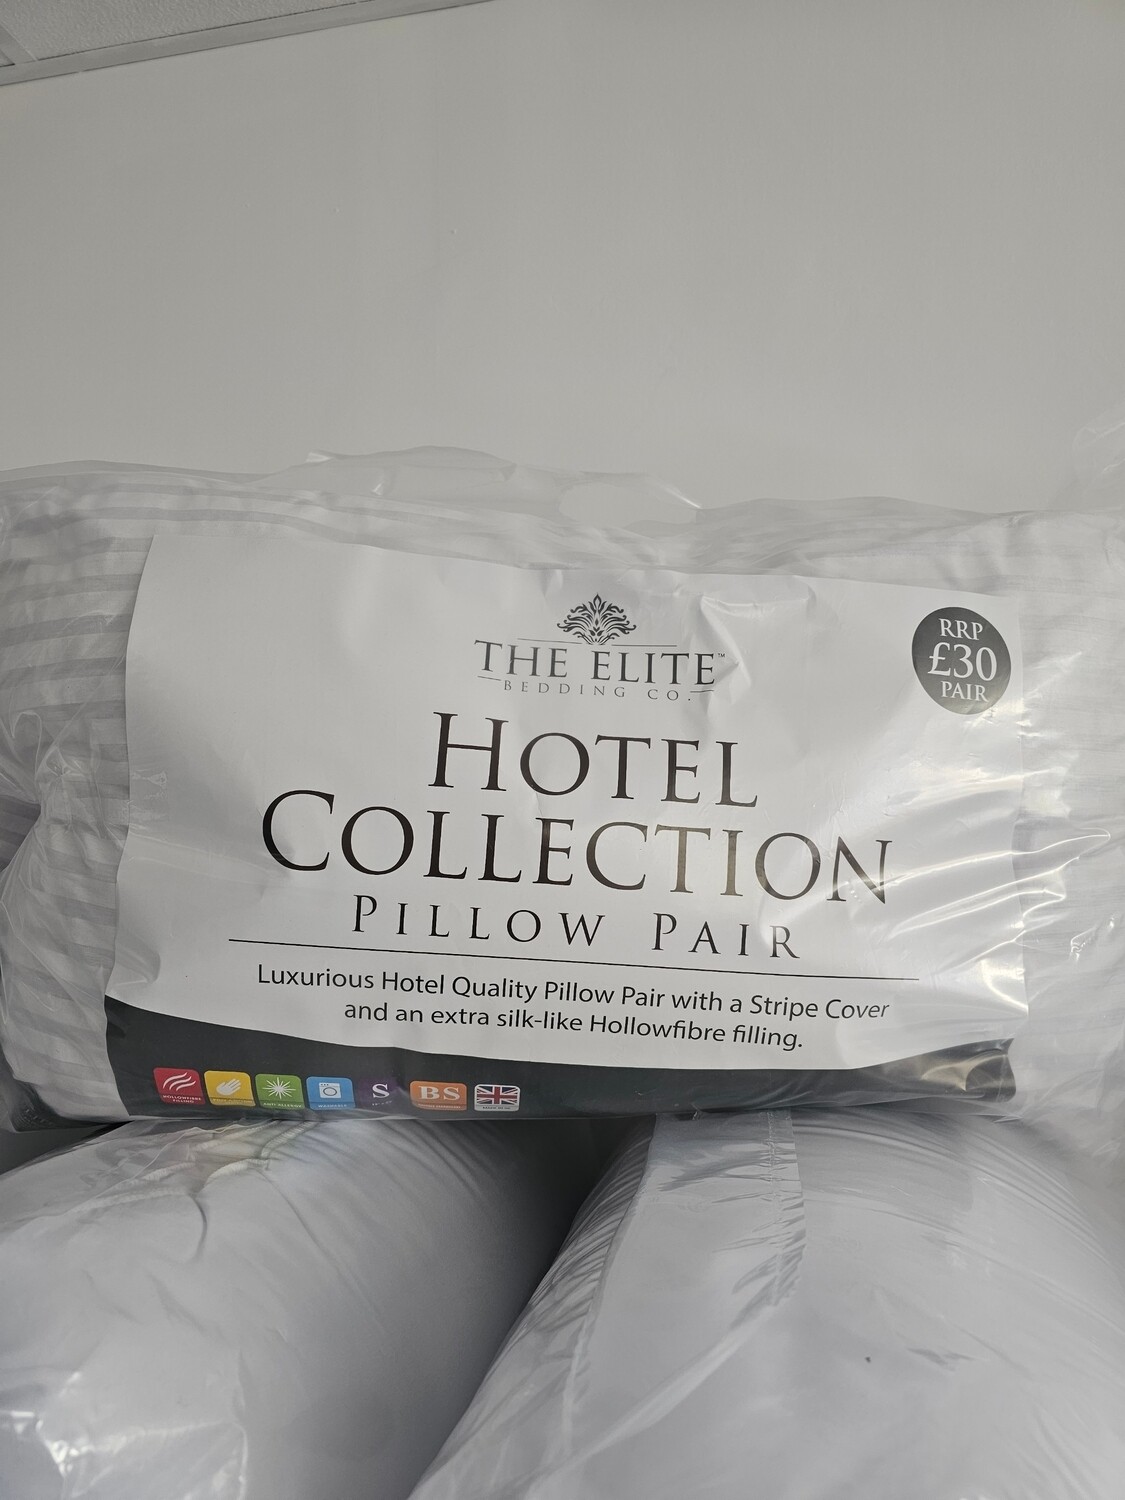 Hotel Collection pillows 2 Per Pack